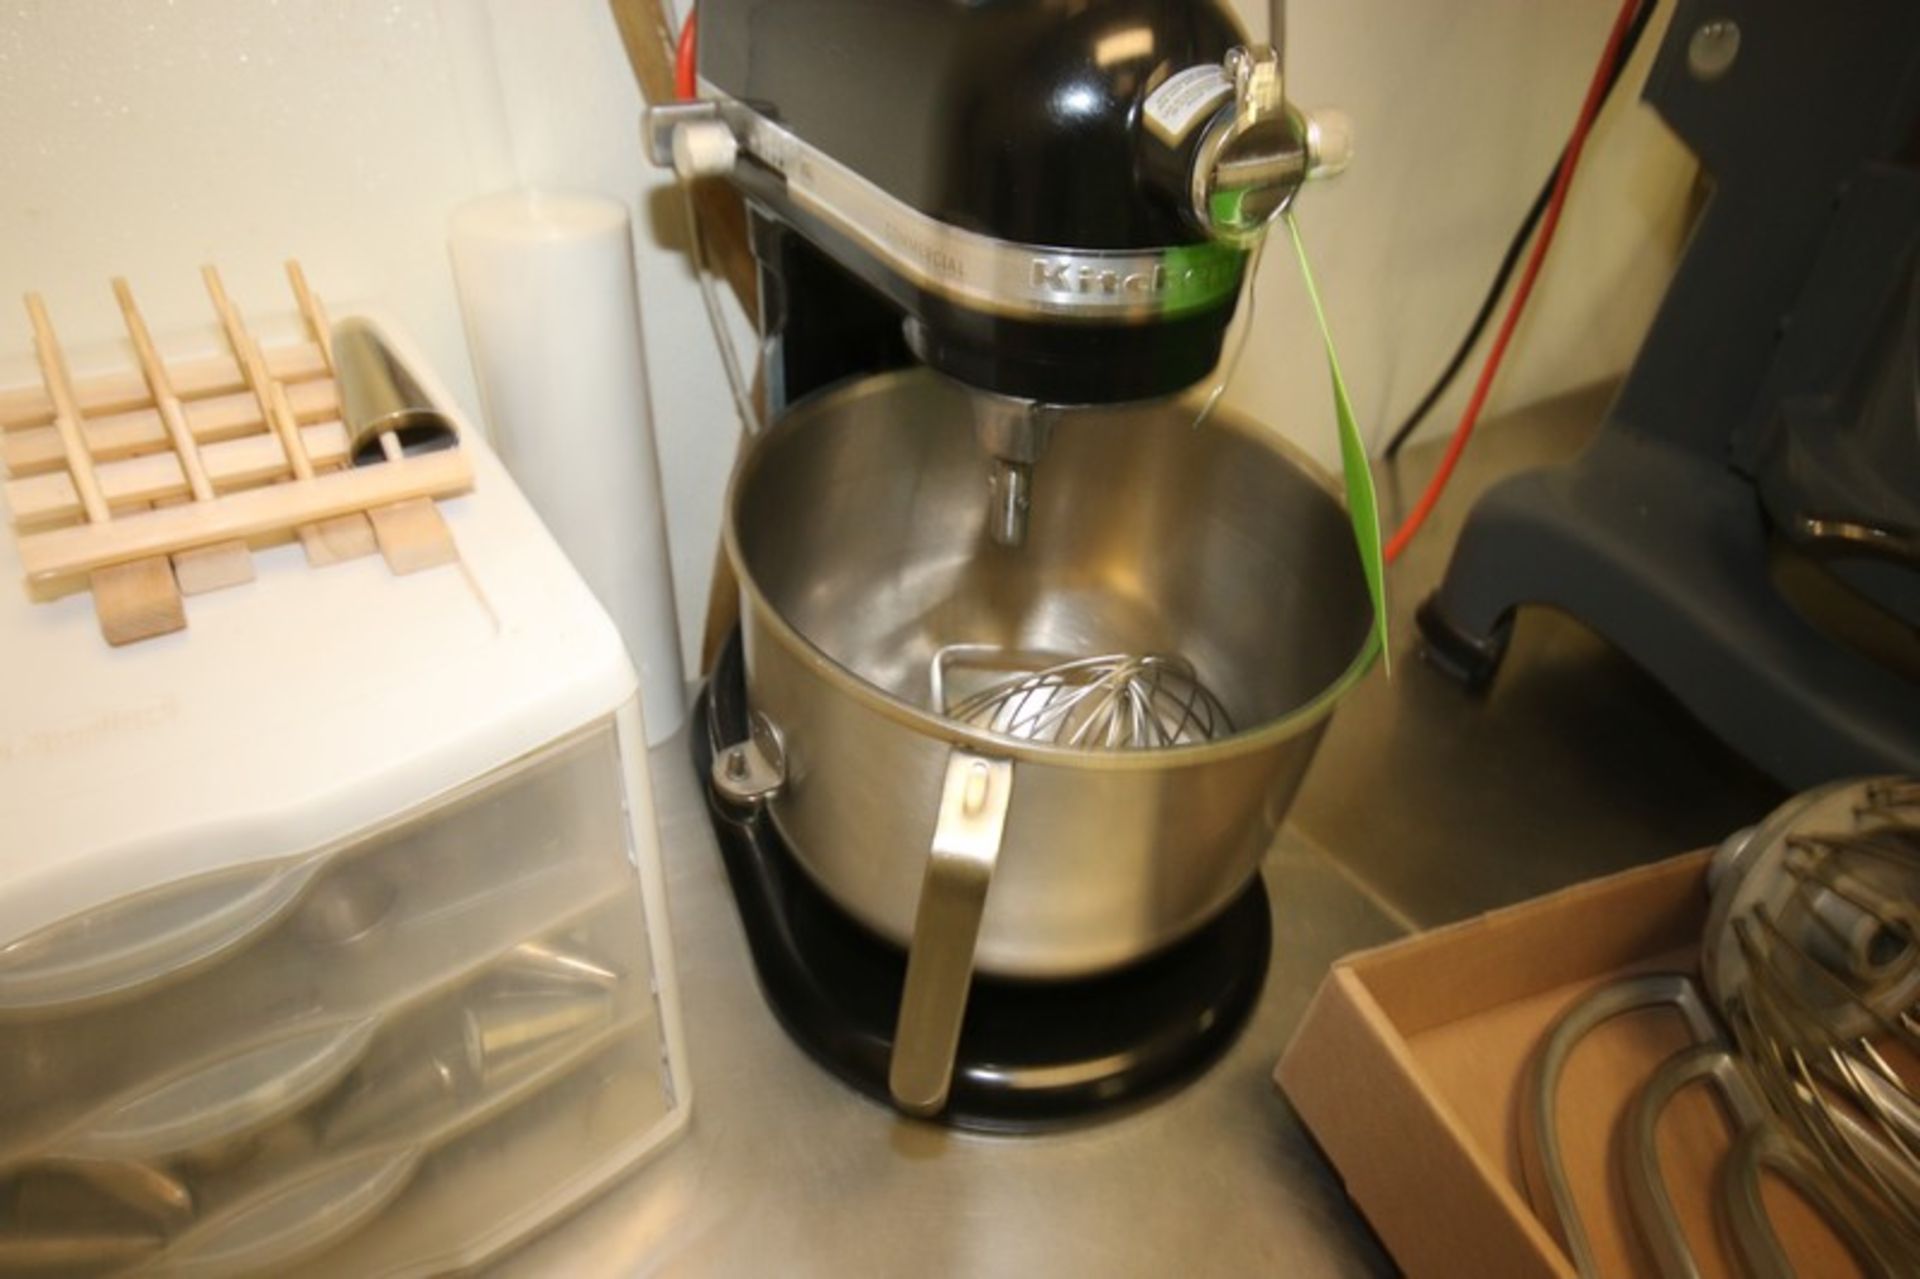 KitchenAid 8 QT S/S Commercial Mixer, with S/S Bowl & Mixing Attachments (Located in McMurray, - Image 4 of 5